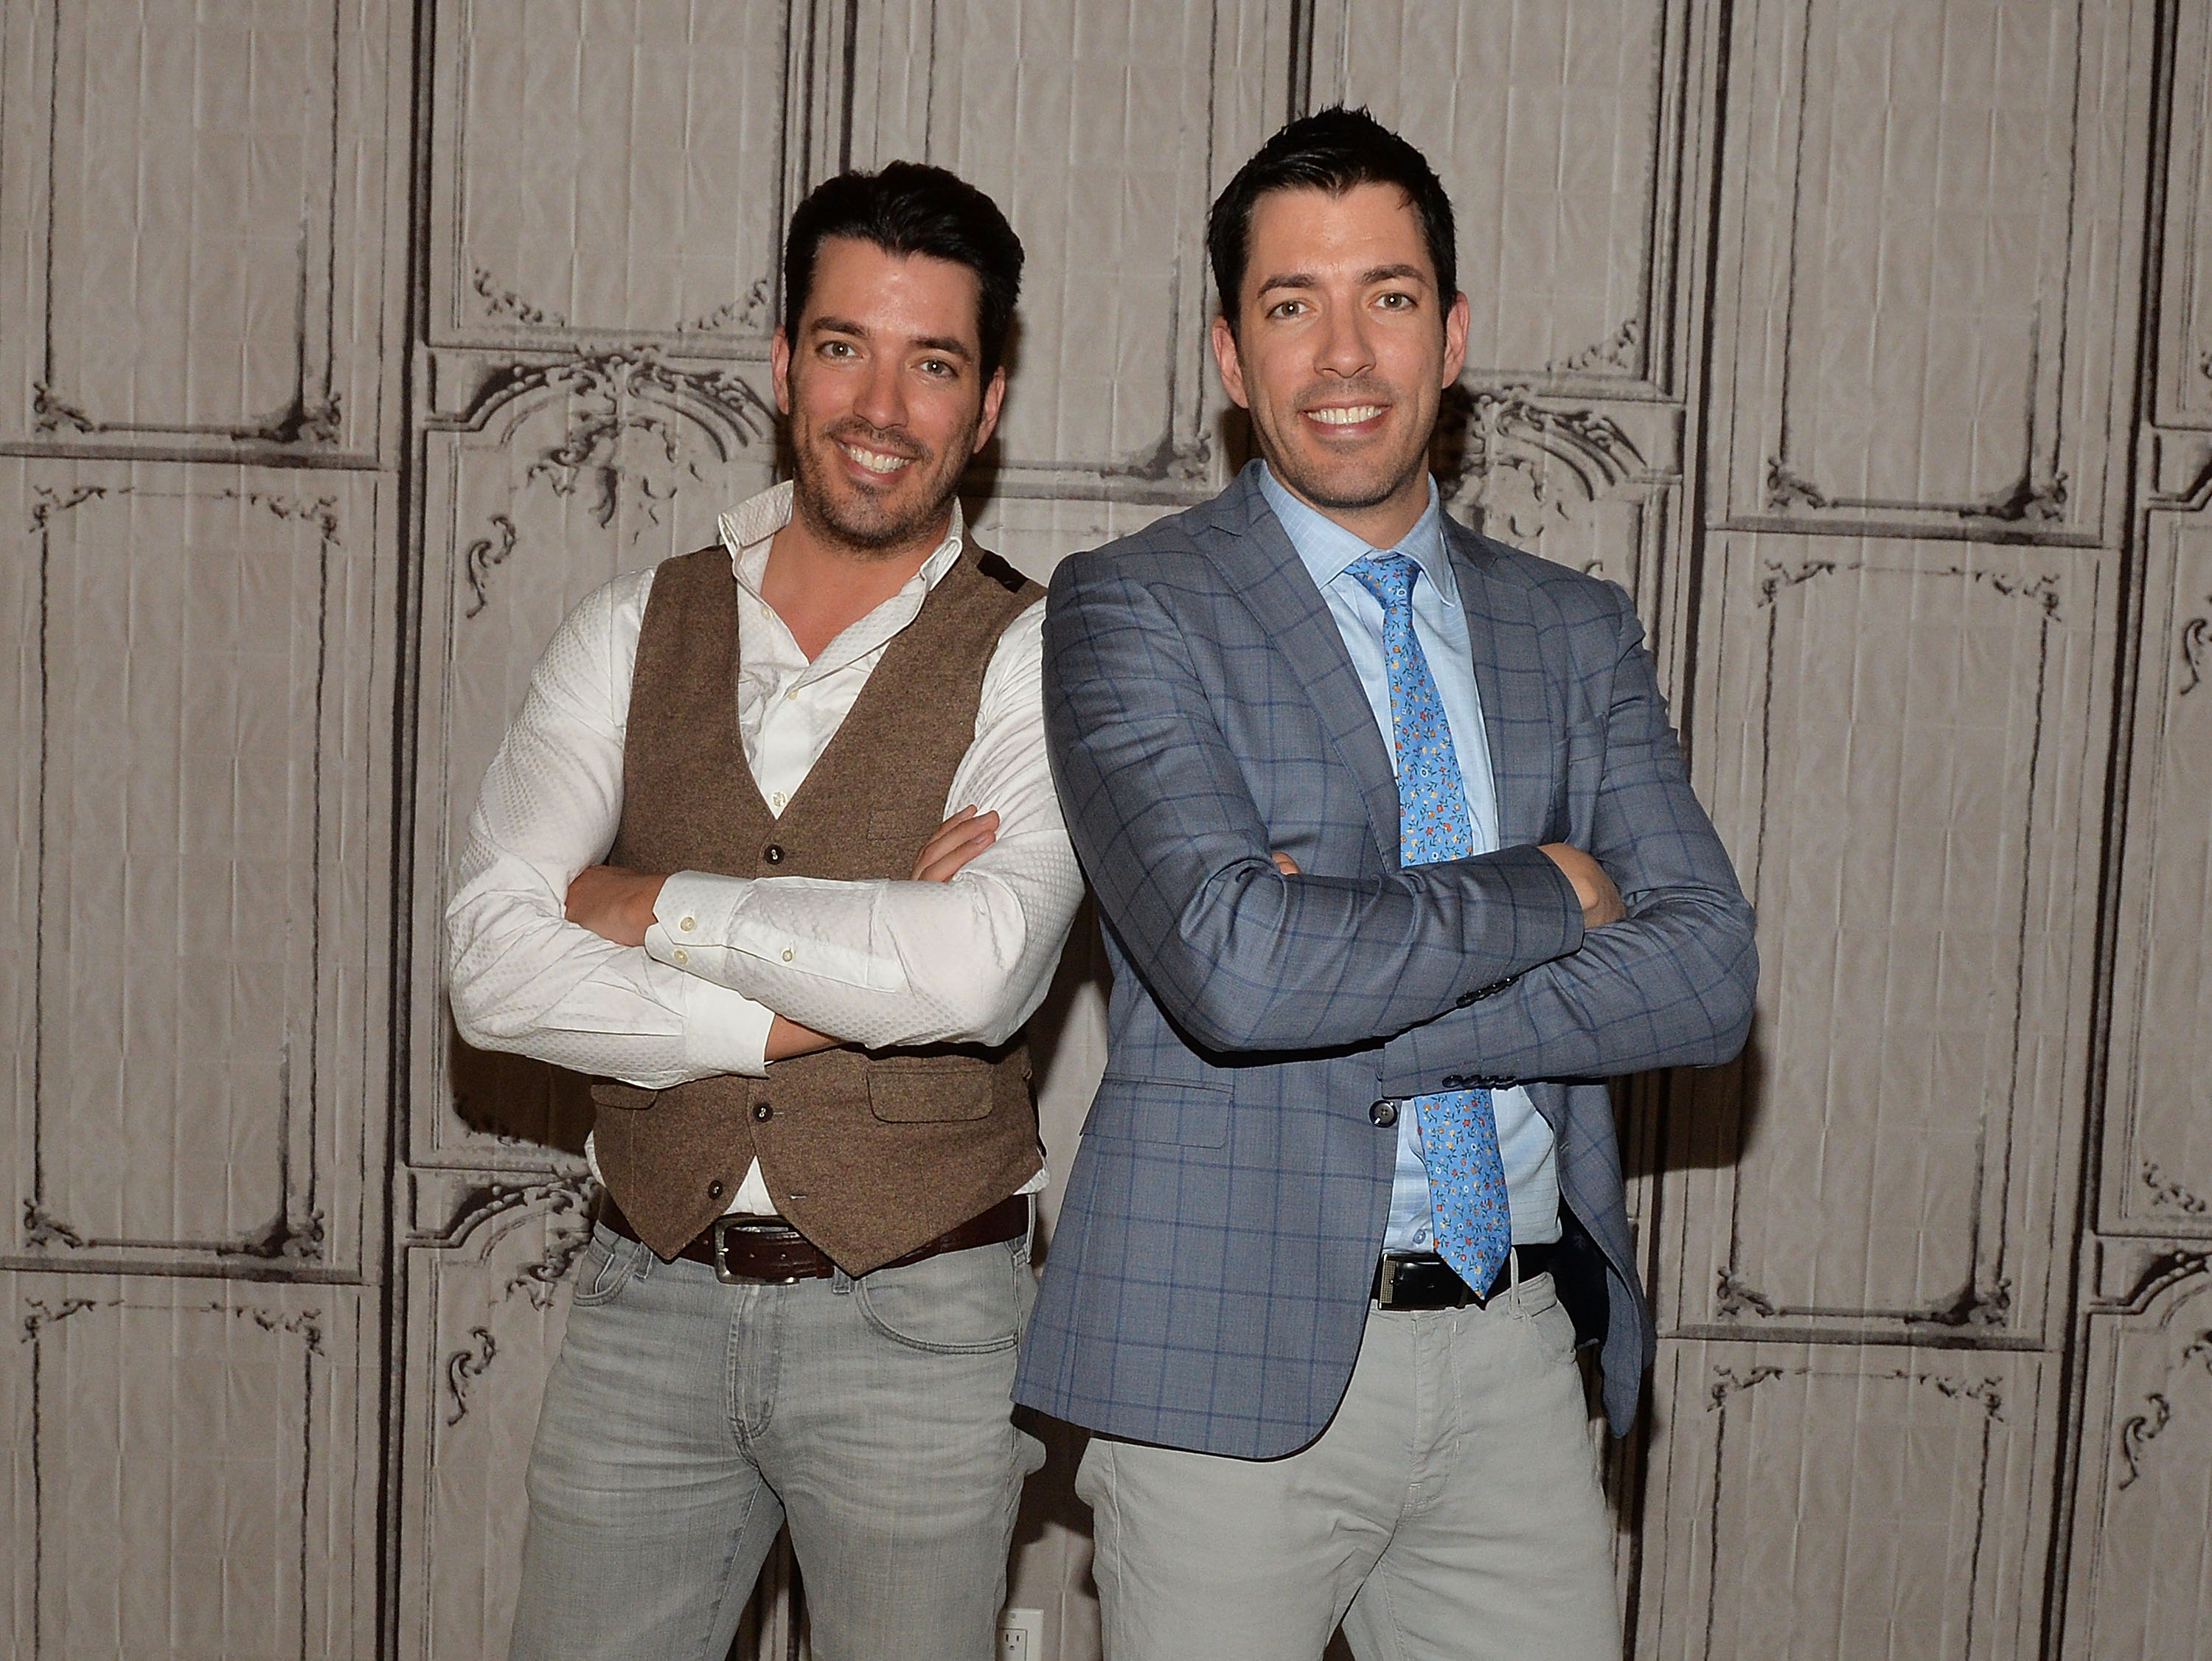  The Property Brothers, Jonathan Scott and Drew Scott visit AOL Build to discuss their book "Dream Home: The Property Brothers Ultimate Guide to Finding & Fixing Your Perfect House" at AOL on April 4, 2016 in New York City | Source: Getty Images